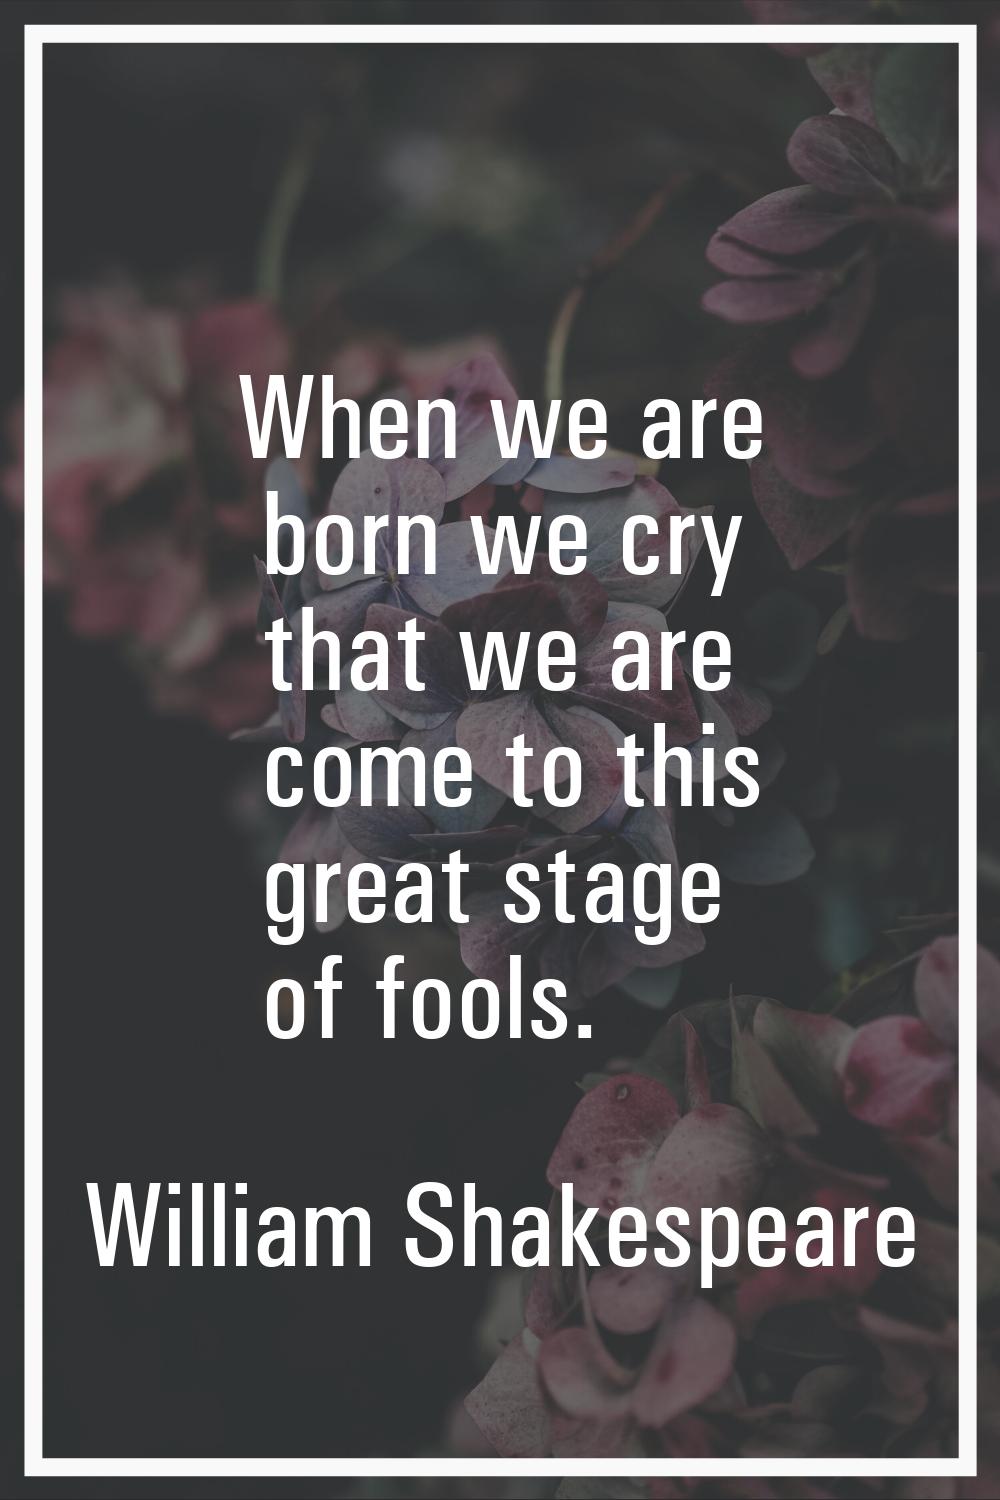 When we are born we cry that we are come to this great stage of fools.